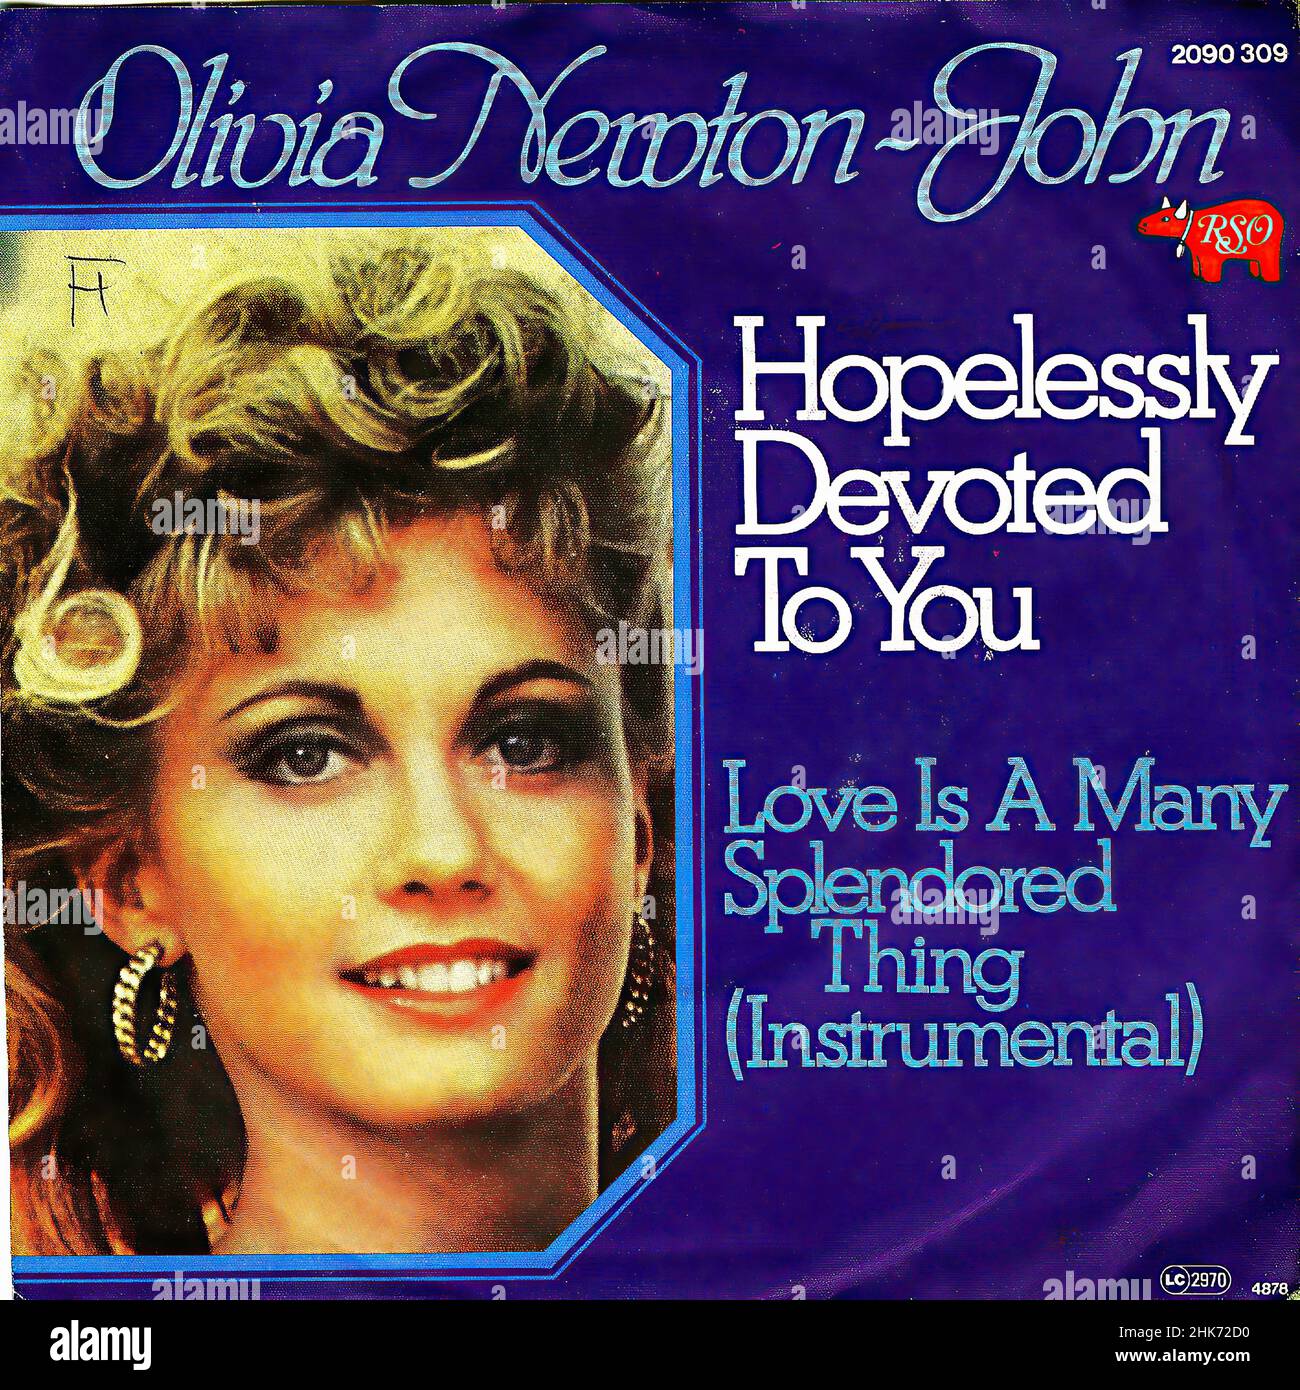 Vintage vinyl record cover - Grease - Soundtrack - OST - Newton-John, Olivia - Hopelessly Devoted To You - D - 1978 Stock Photo